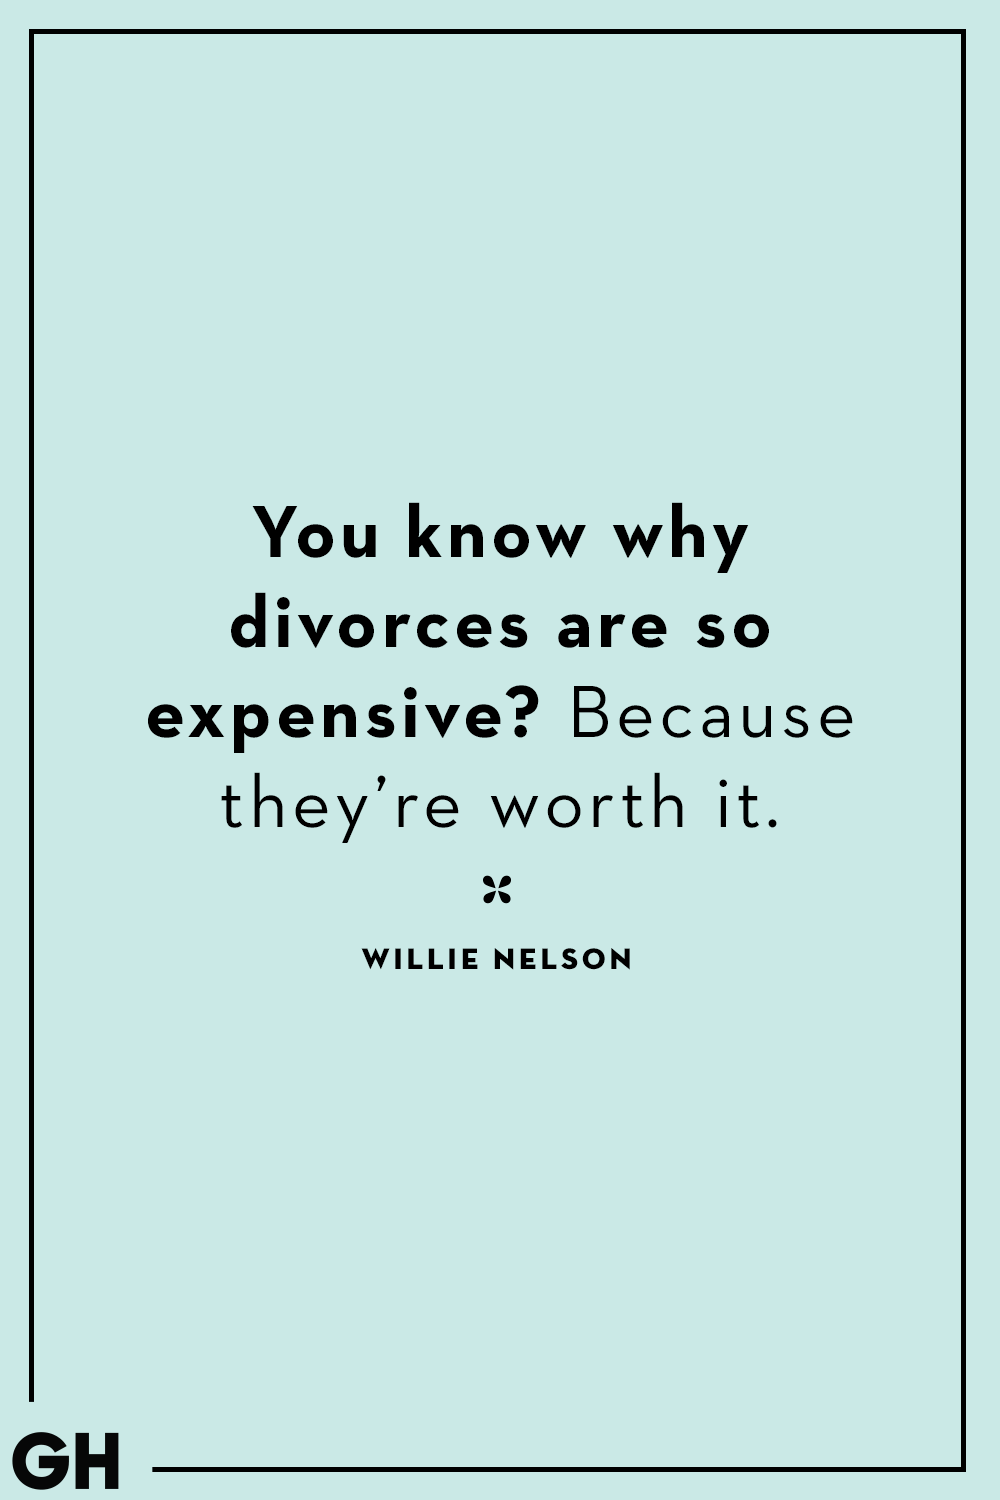 After Divorce Motivational Quotes For Divorced Woman - Just Another